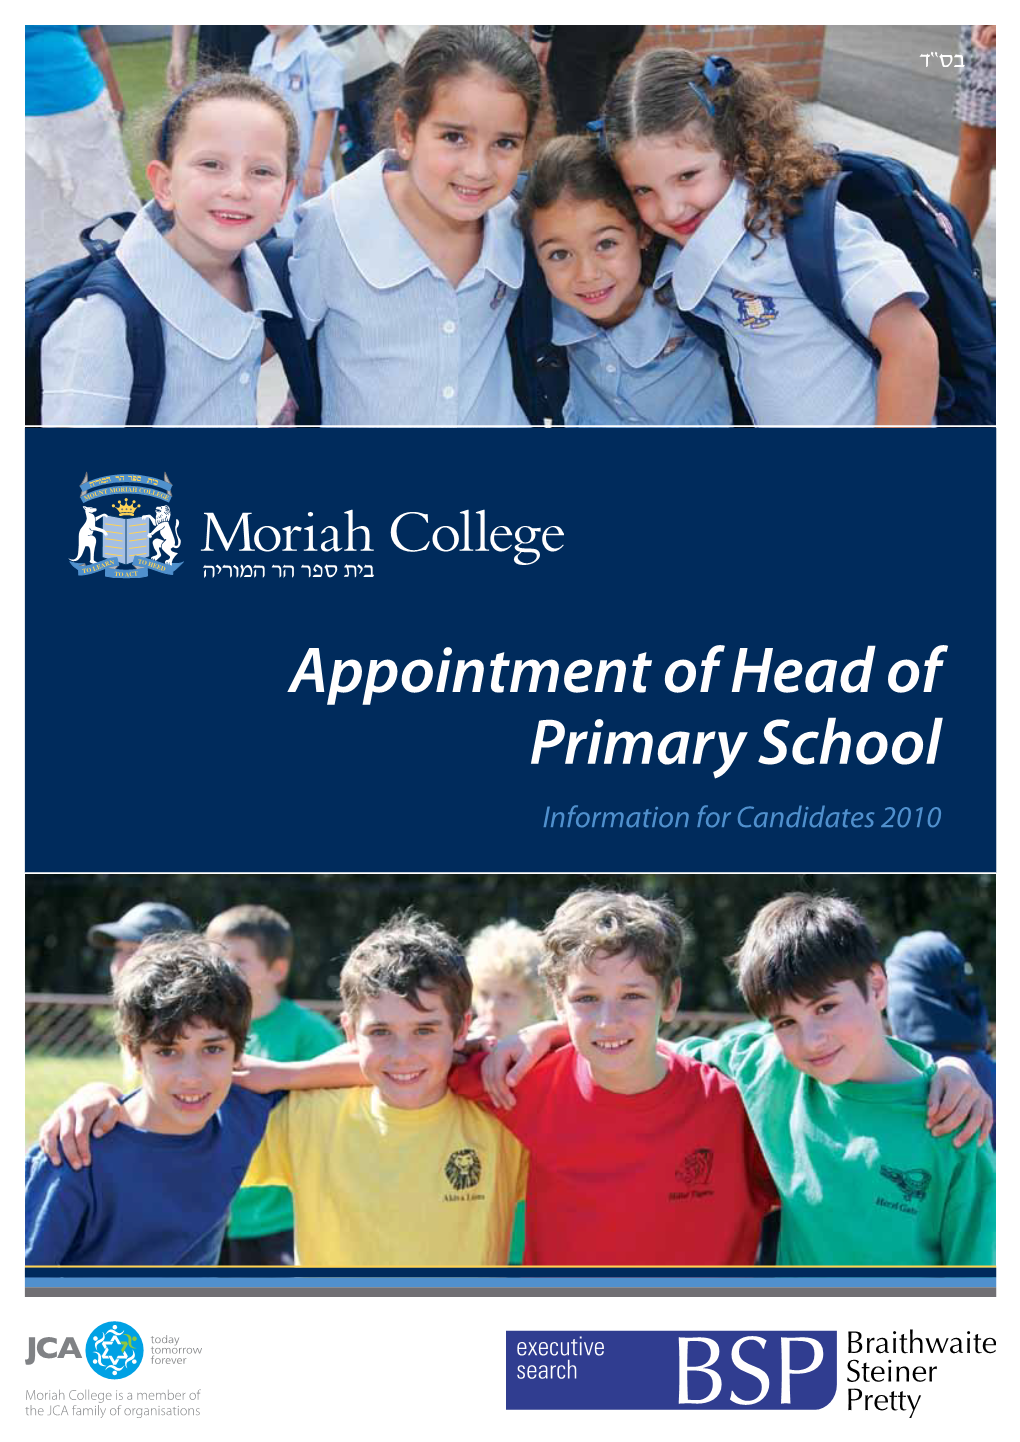 Appointment of Head of Primary School Information for Candidates 2010